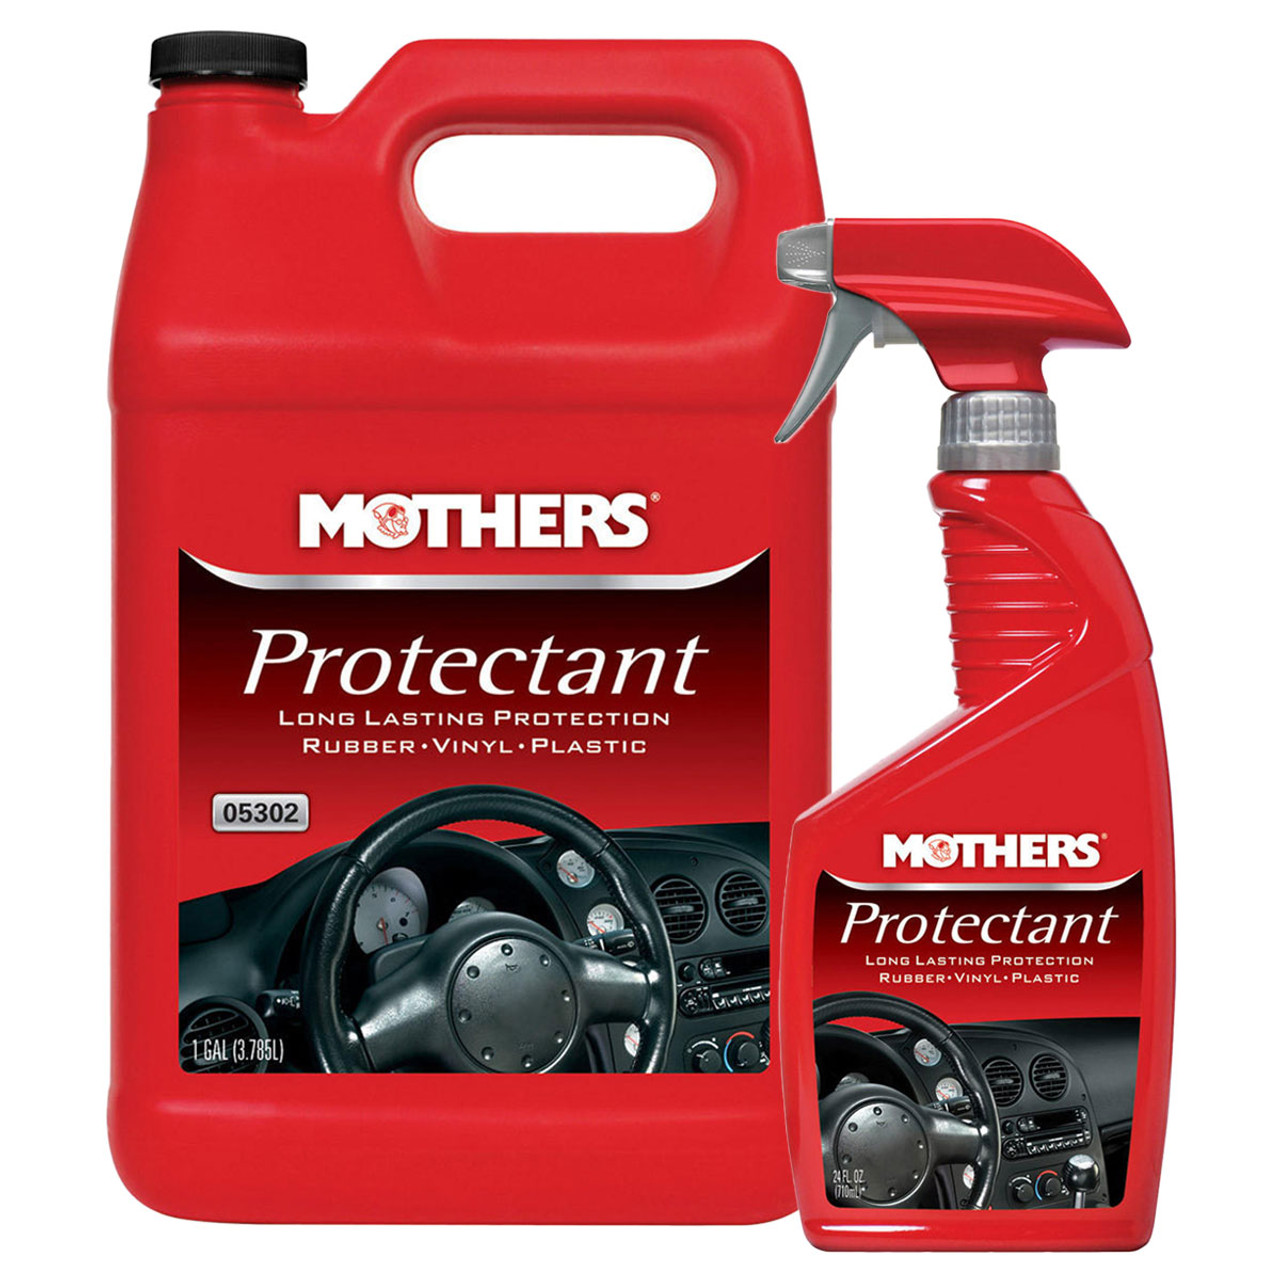 Mothers Protectant for Rubber, Vinyl & Plastic